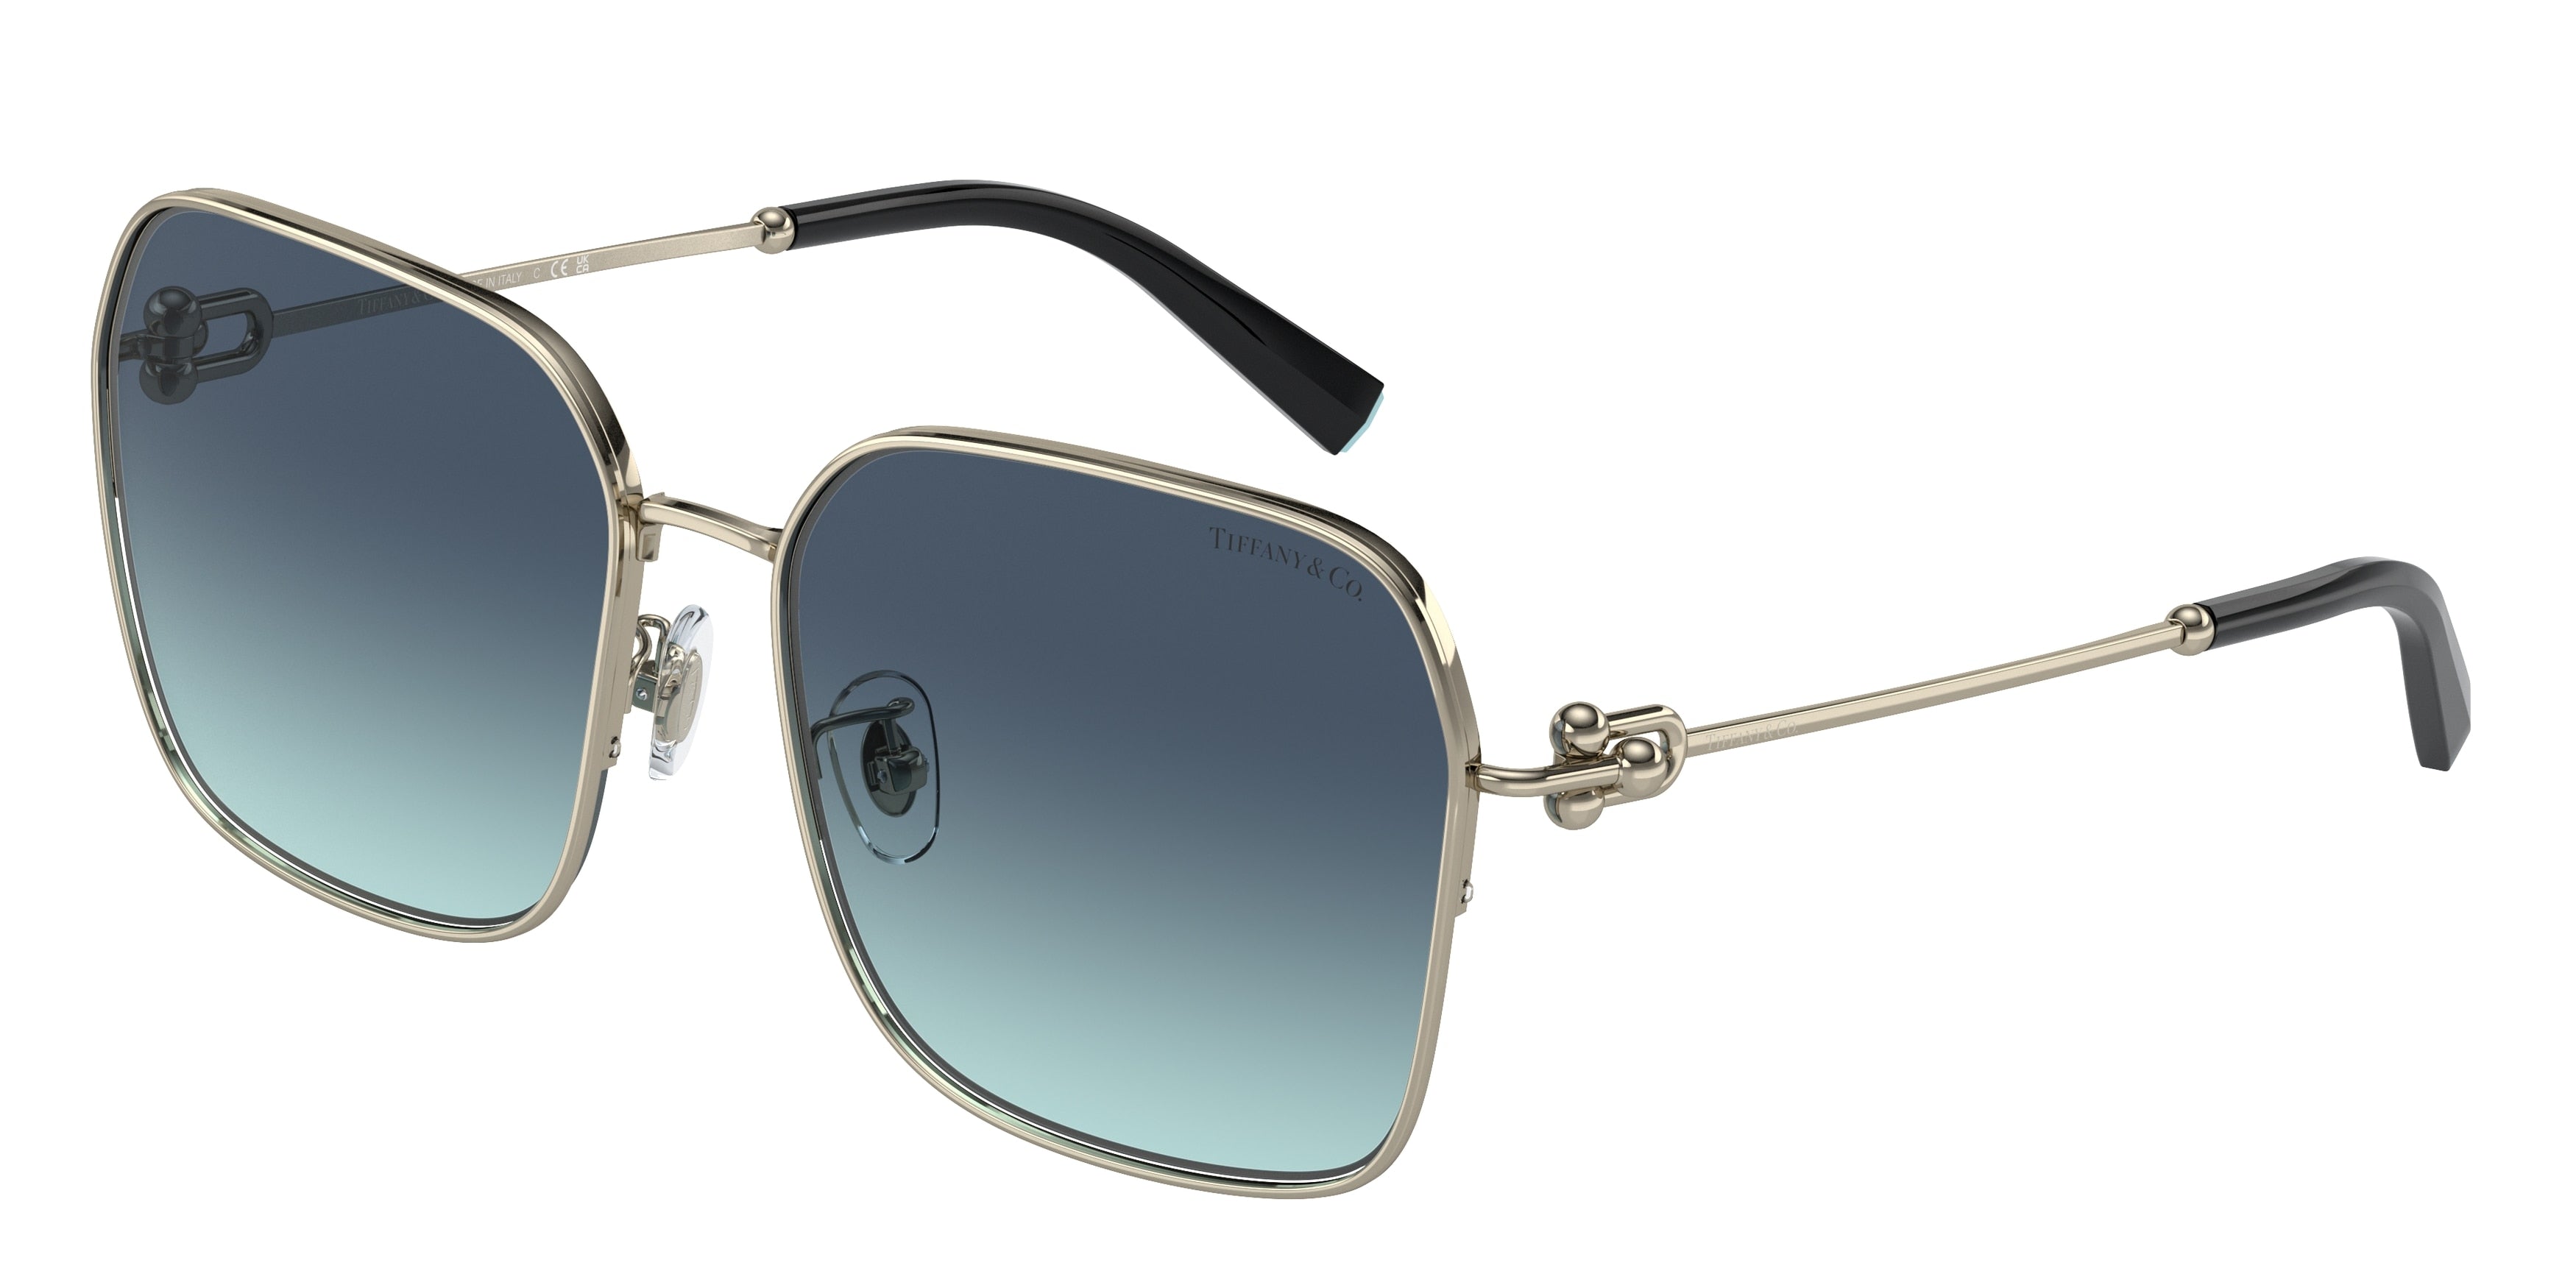 Tiffany TF3093D Square Sunglasses  60219S-Pale Gold 60-140-17 - Color Map Gold